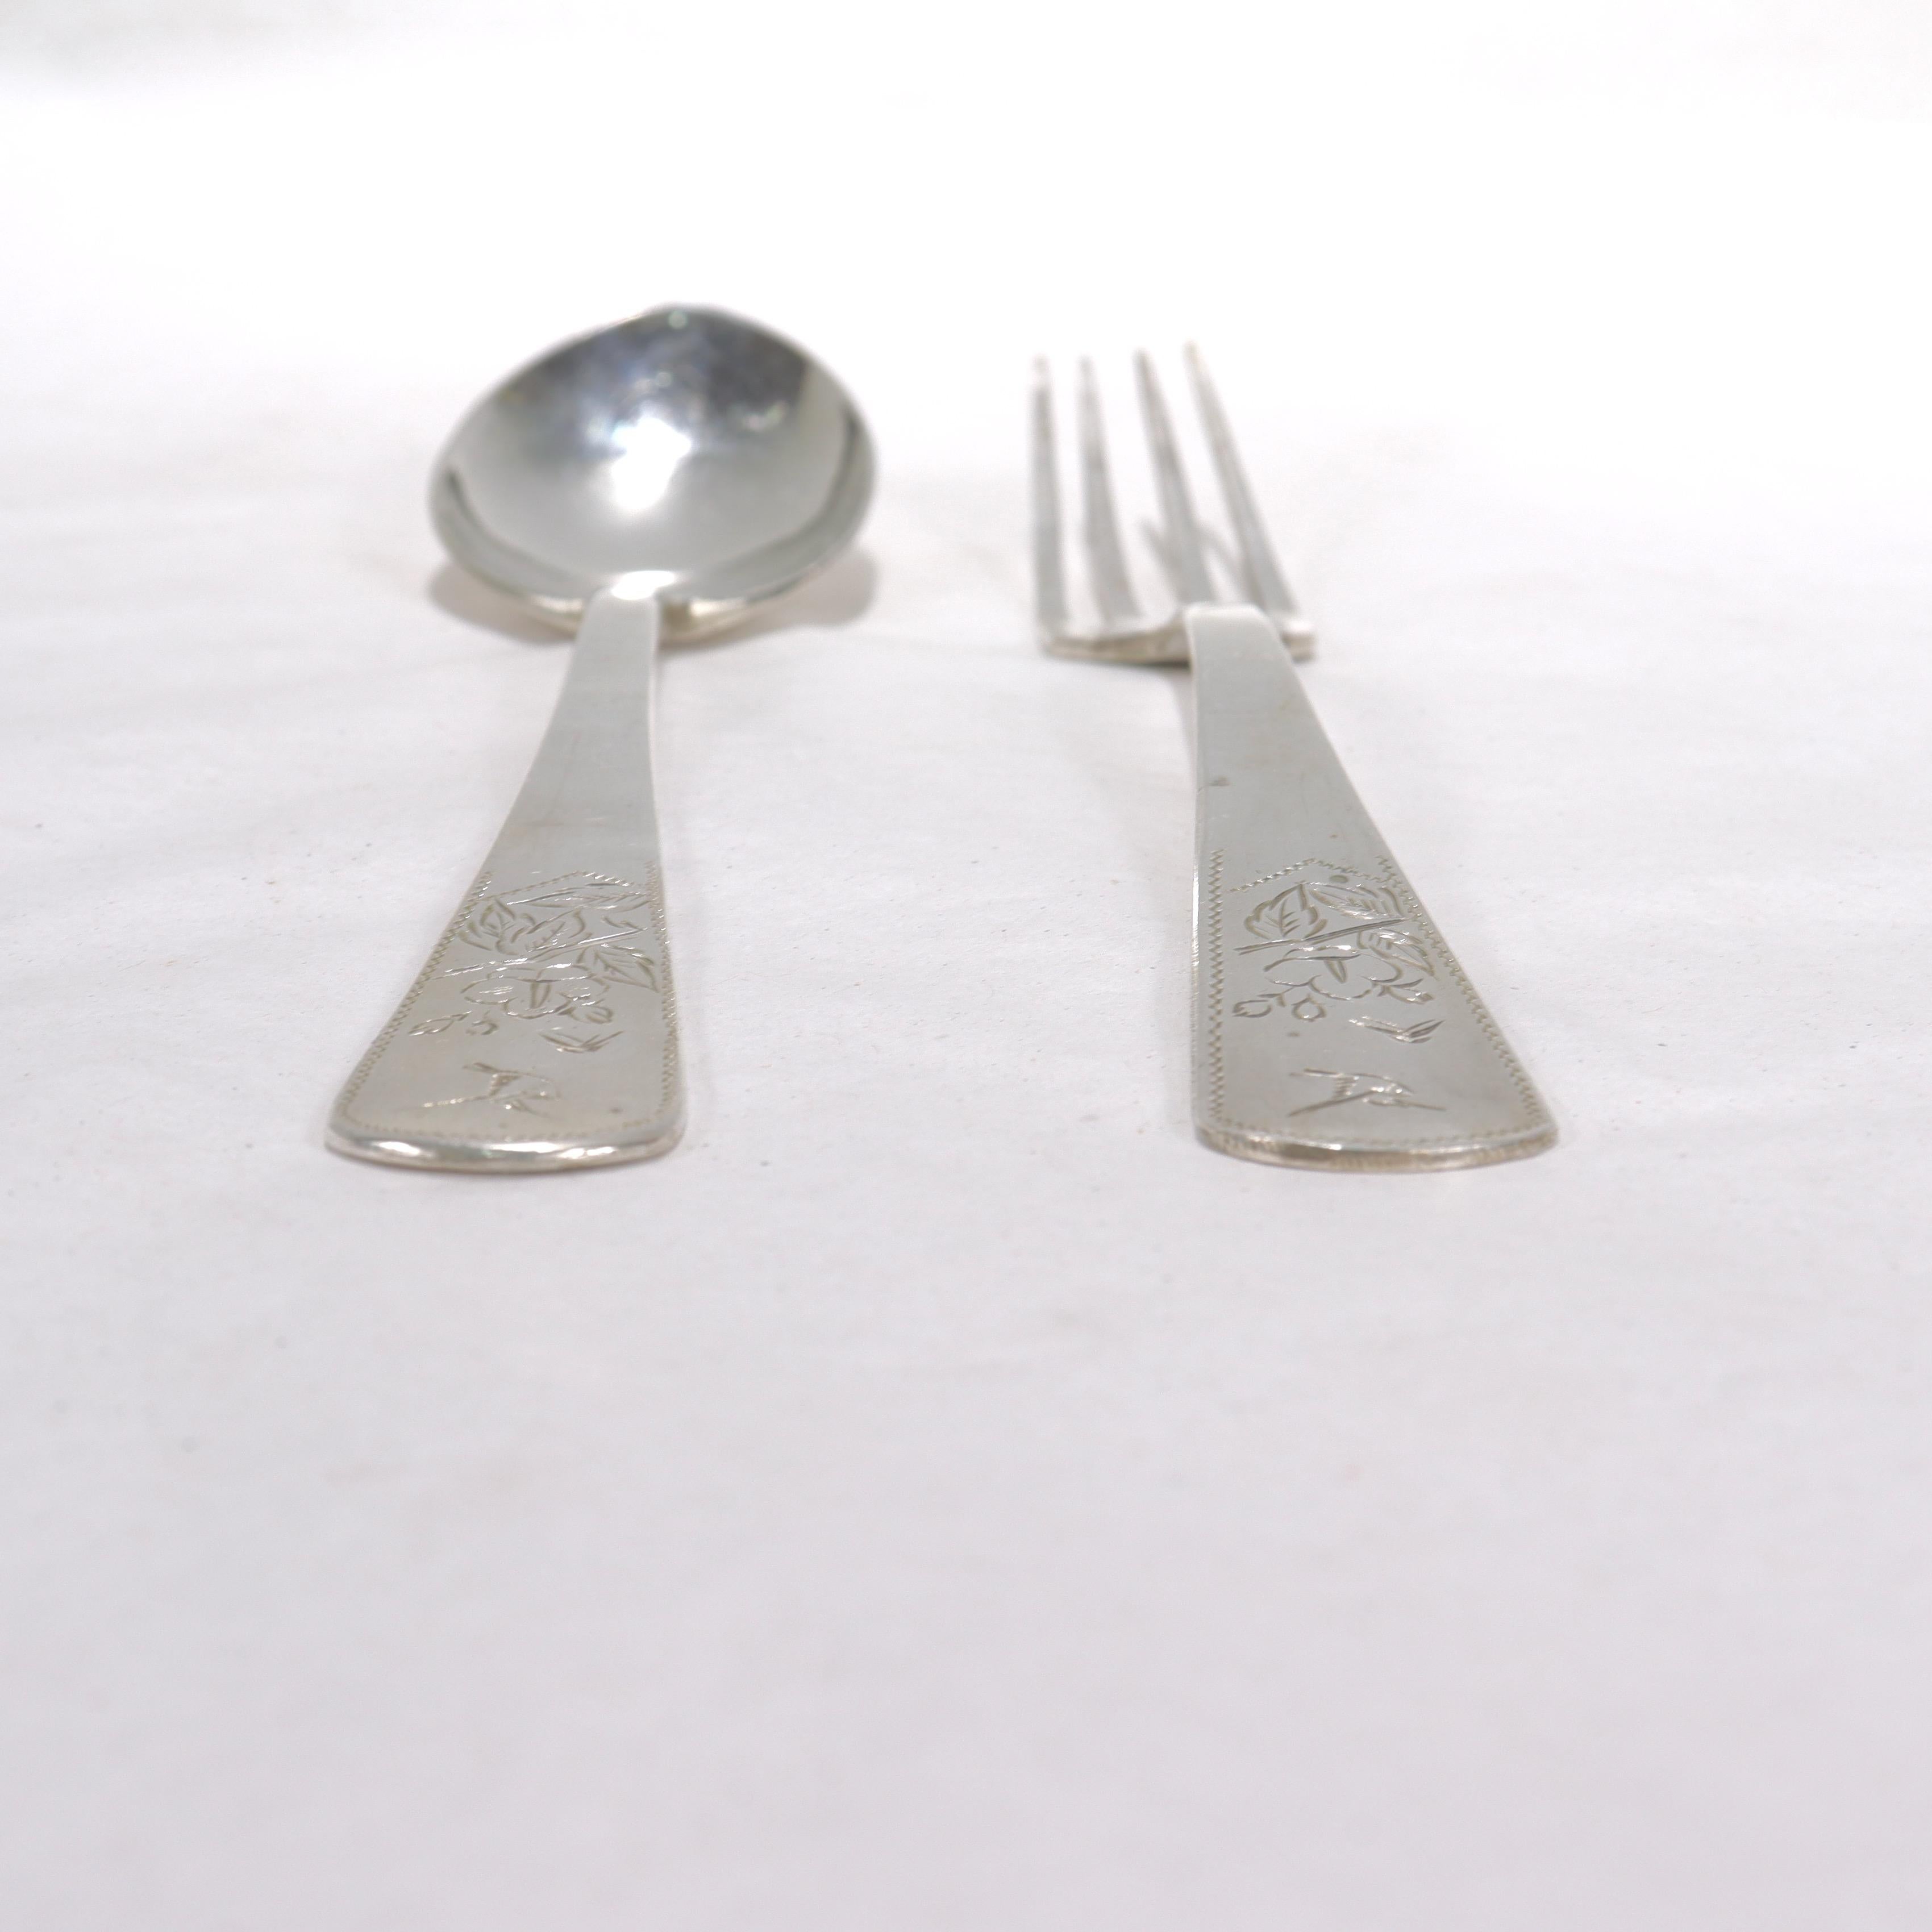 Old or Antique Chinese Export Silver Fork & Spoon In Good Condition For Sale In Philadelphia, PA